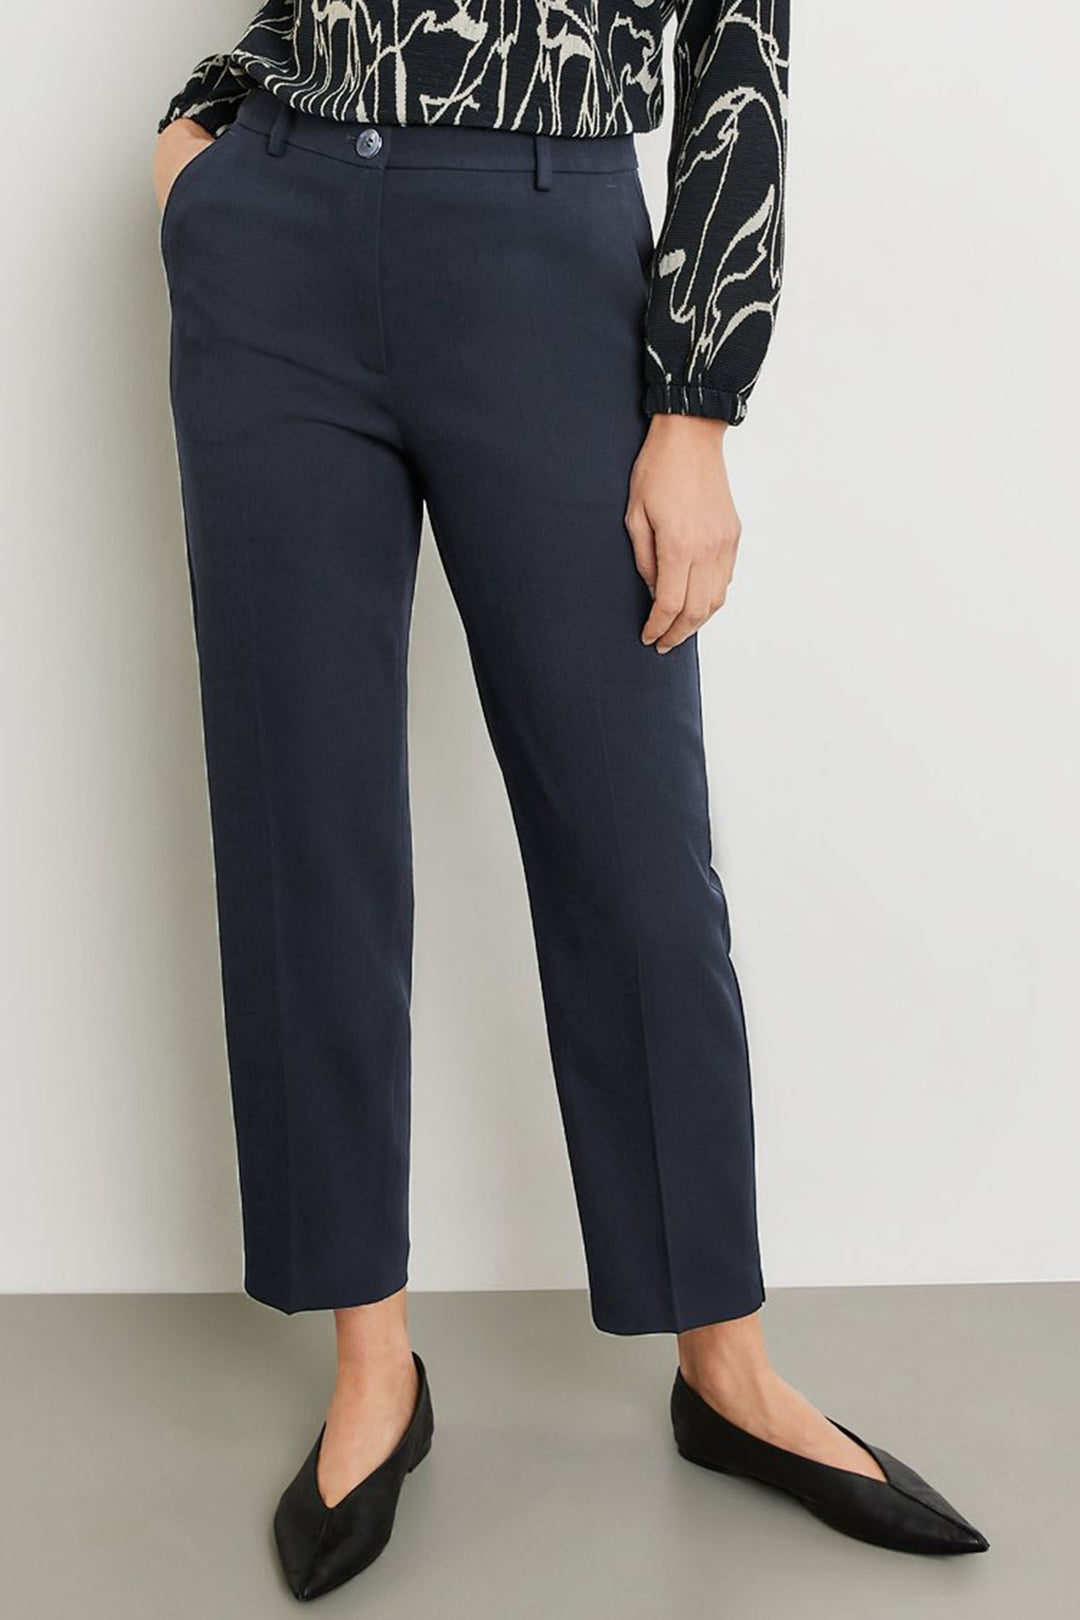 Gerry Weber 320008 31250 Navy Straight Fit Trousers - Experience Boutique